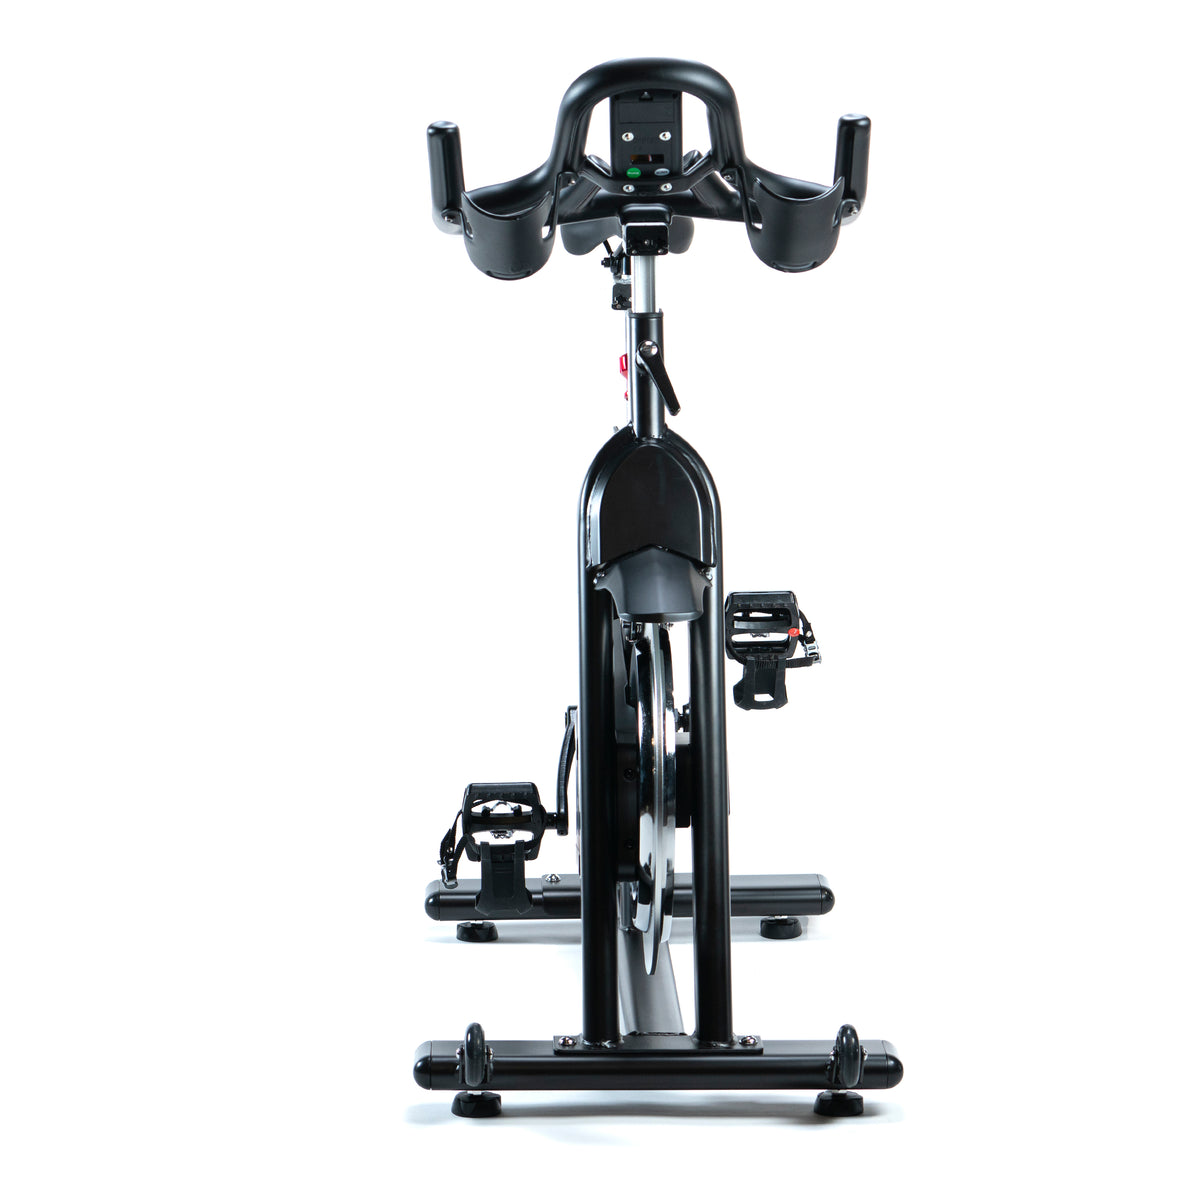 FitWay Equip. 1500IC Indoor Cycle rear view